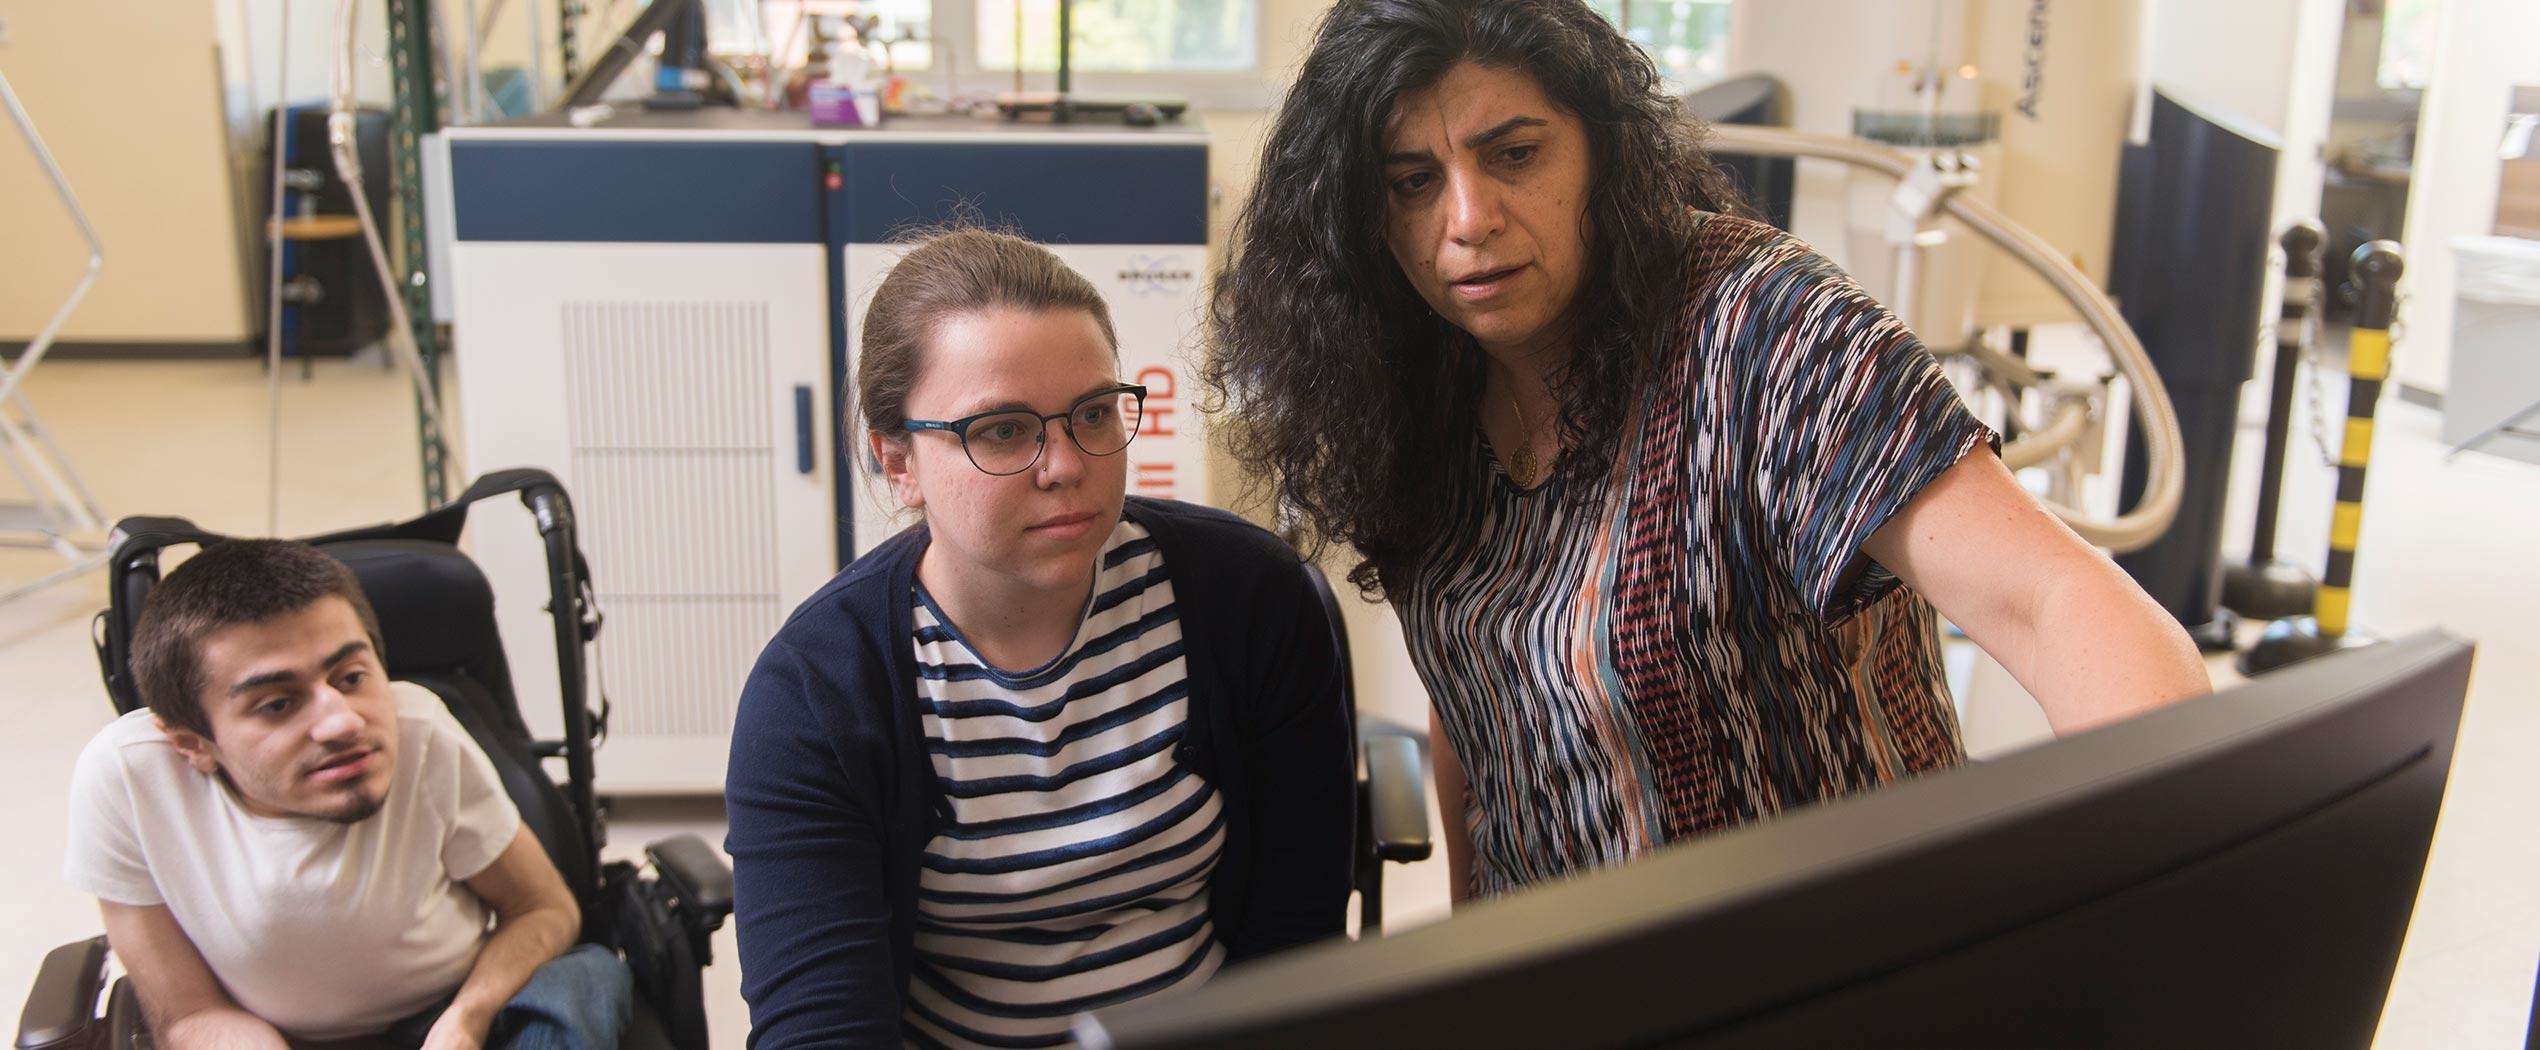 Elisar Barbar analyzing lab data on a computer with two graduate students in her lab.